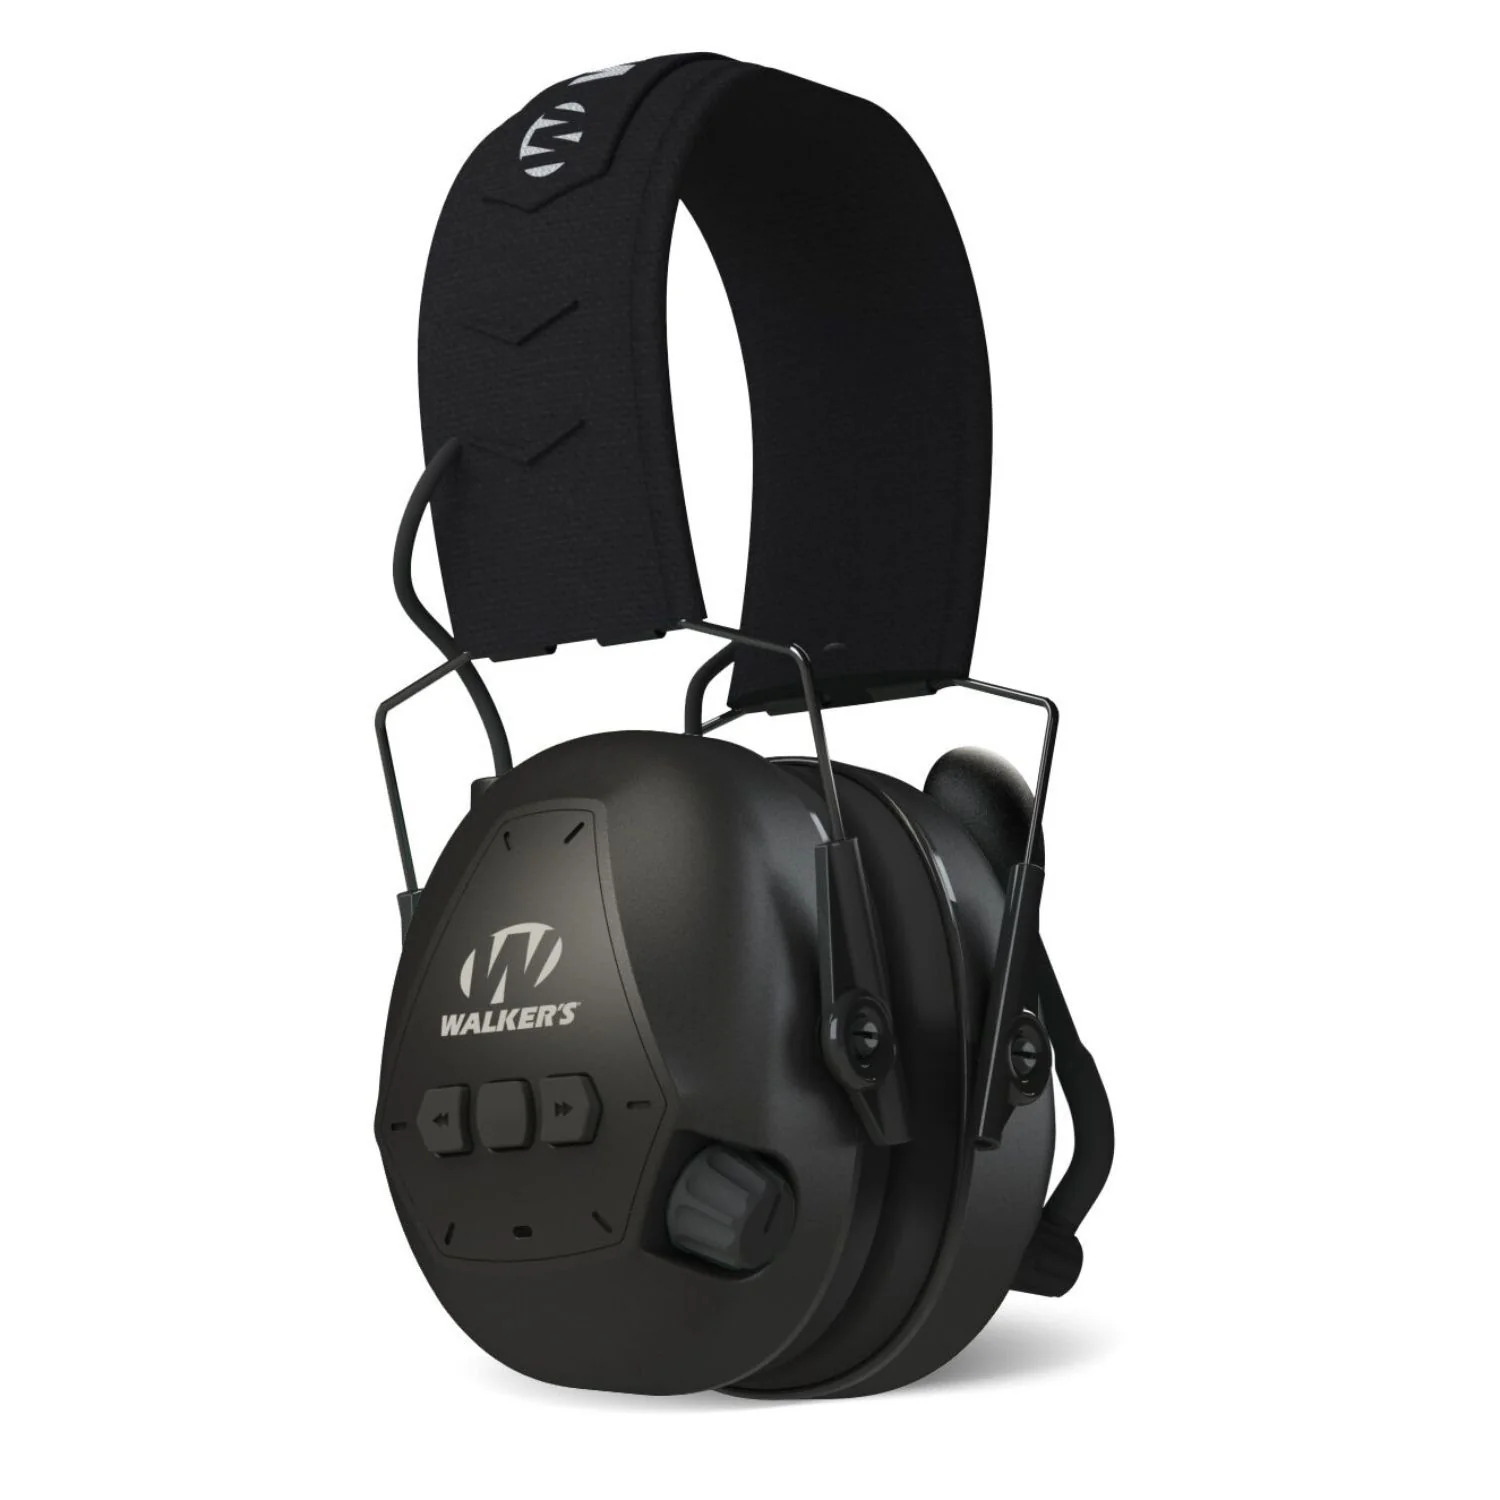 Walkers Bluetooth Passive Muff - image 1 of 2